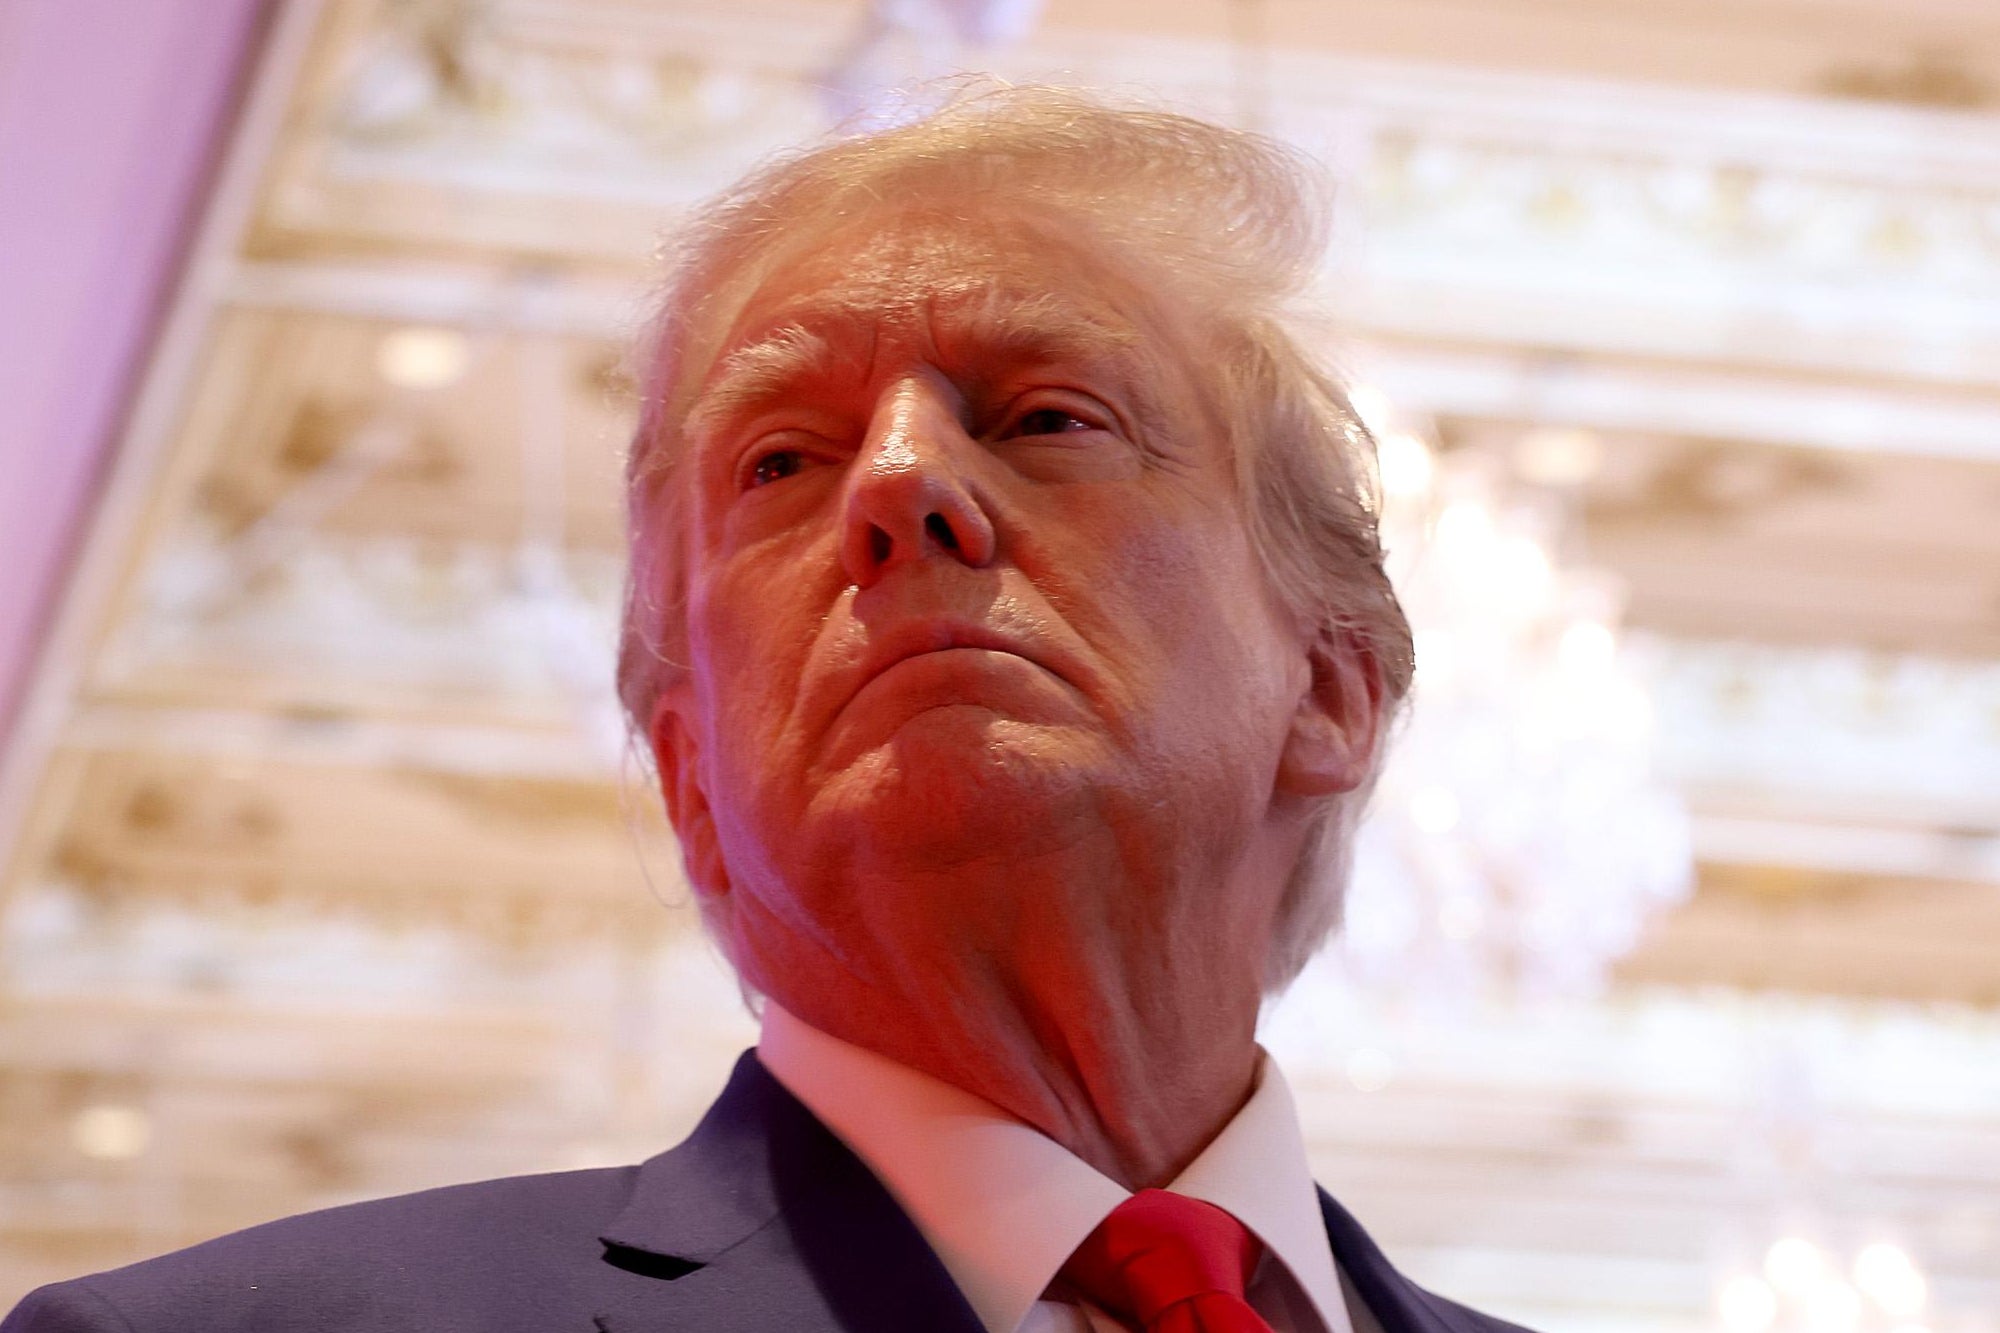 Trump looking upward in a suit, frowning close-mouthed, a fancy ceiling with chandelier behind him.